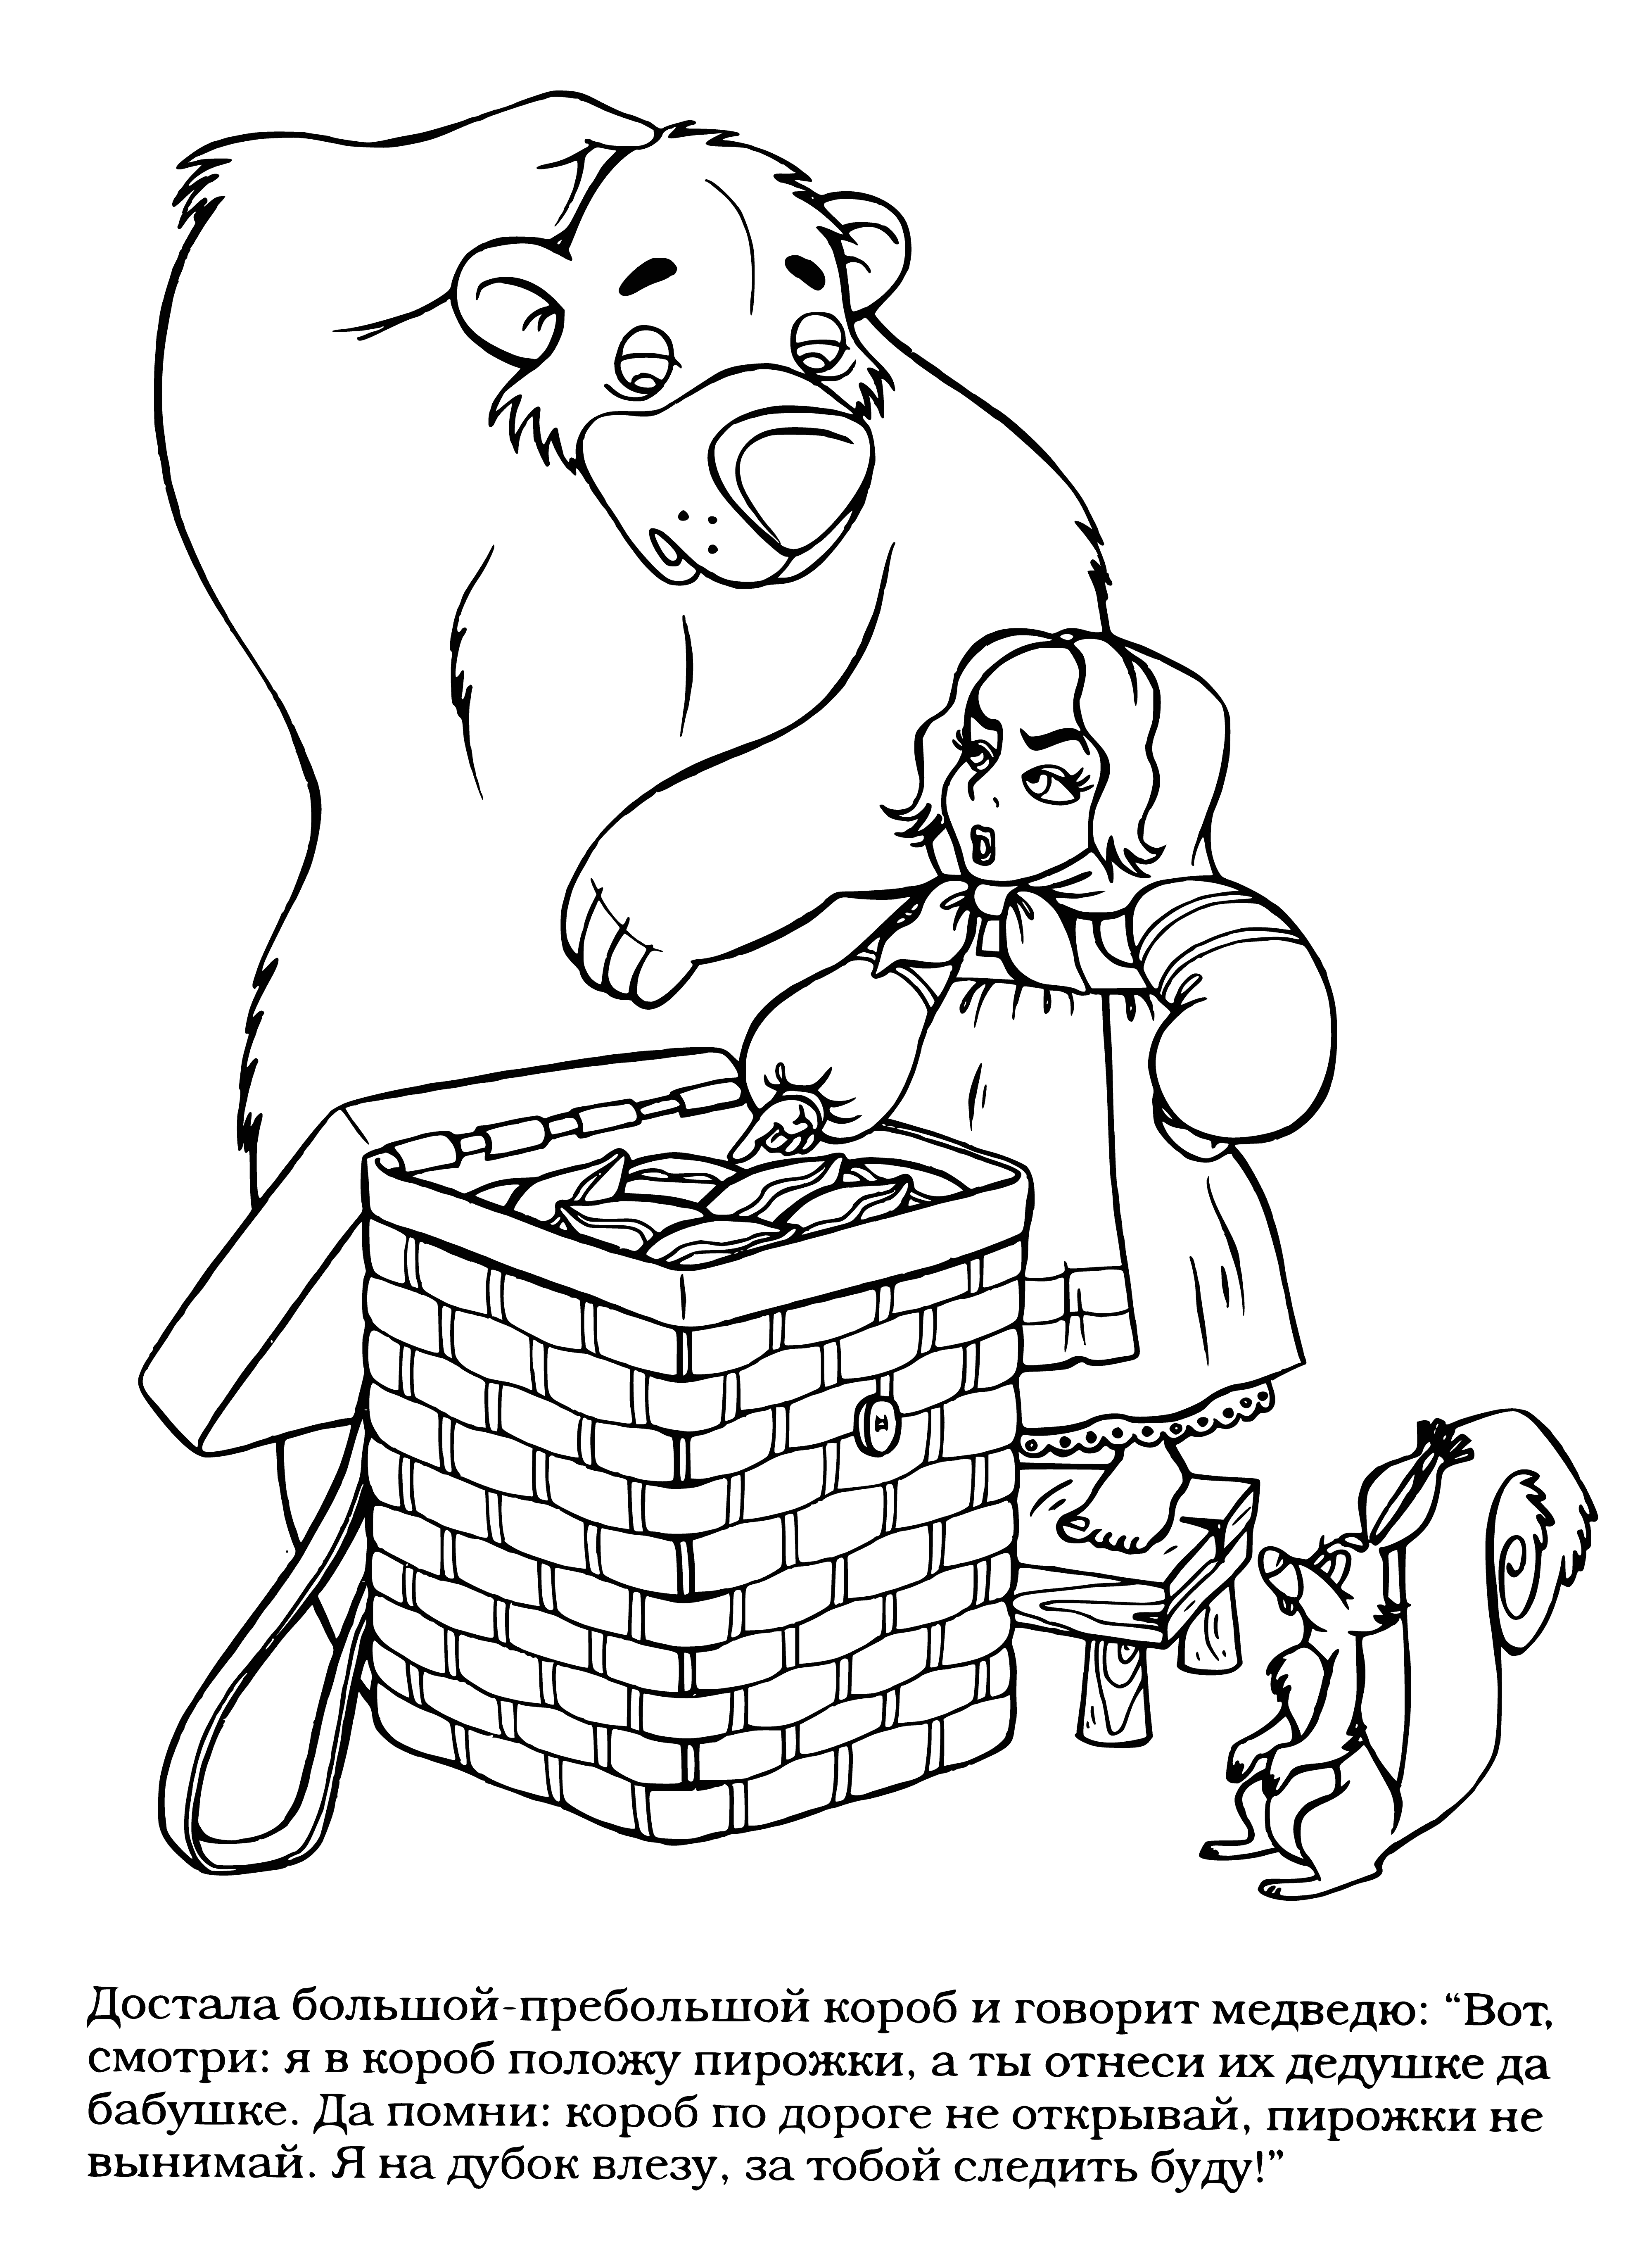 Box with pies coloring page